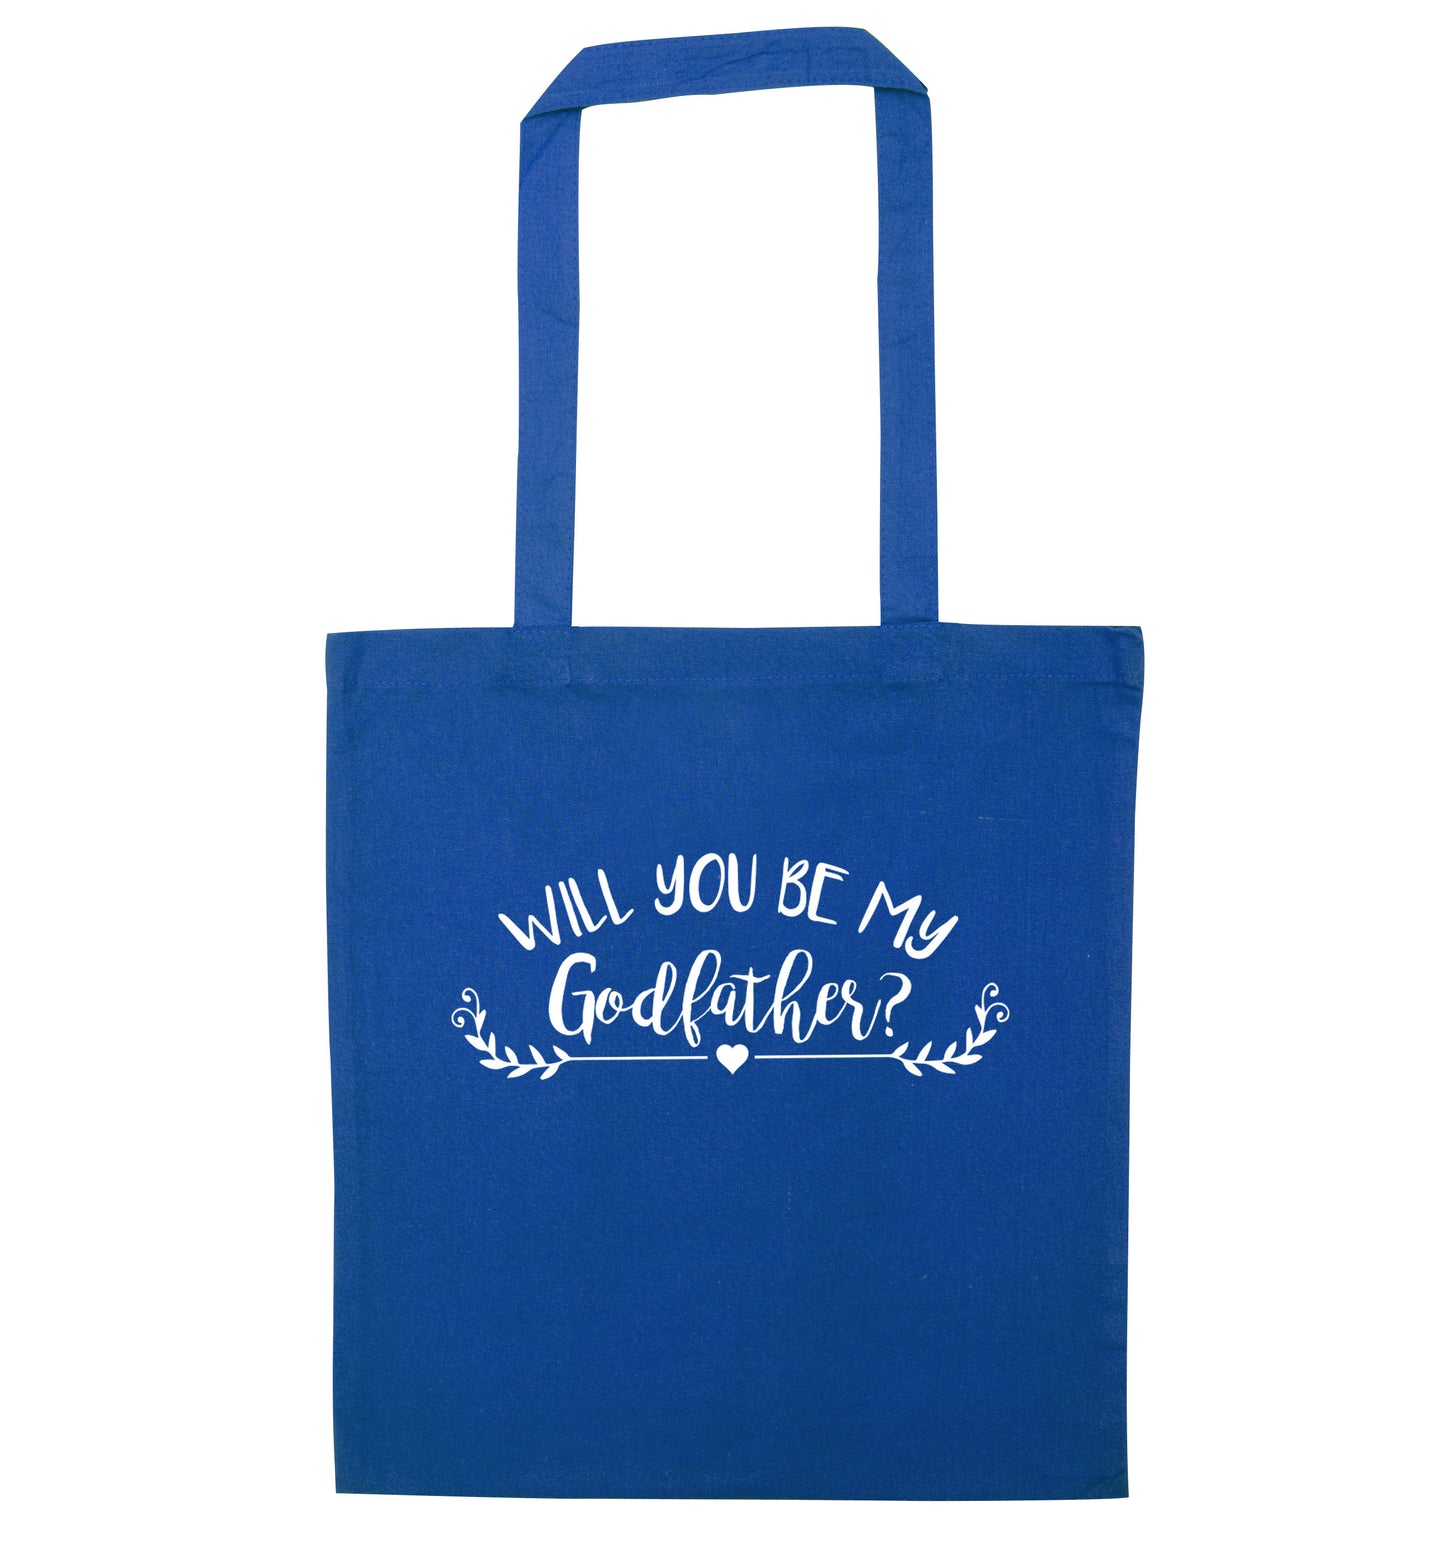 Will you be my godfather? blue tote bag